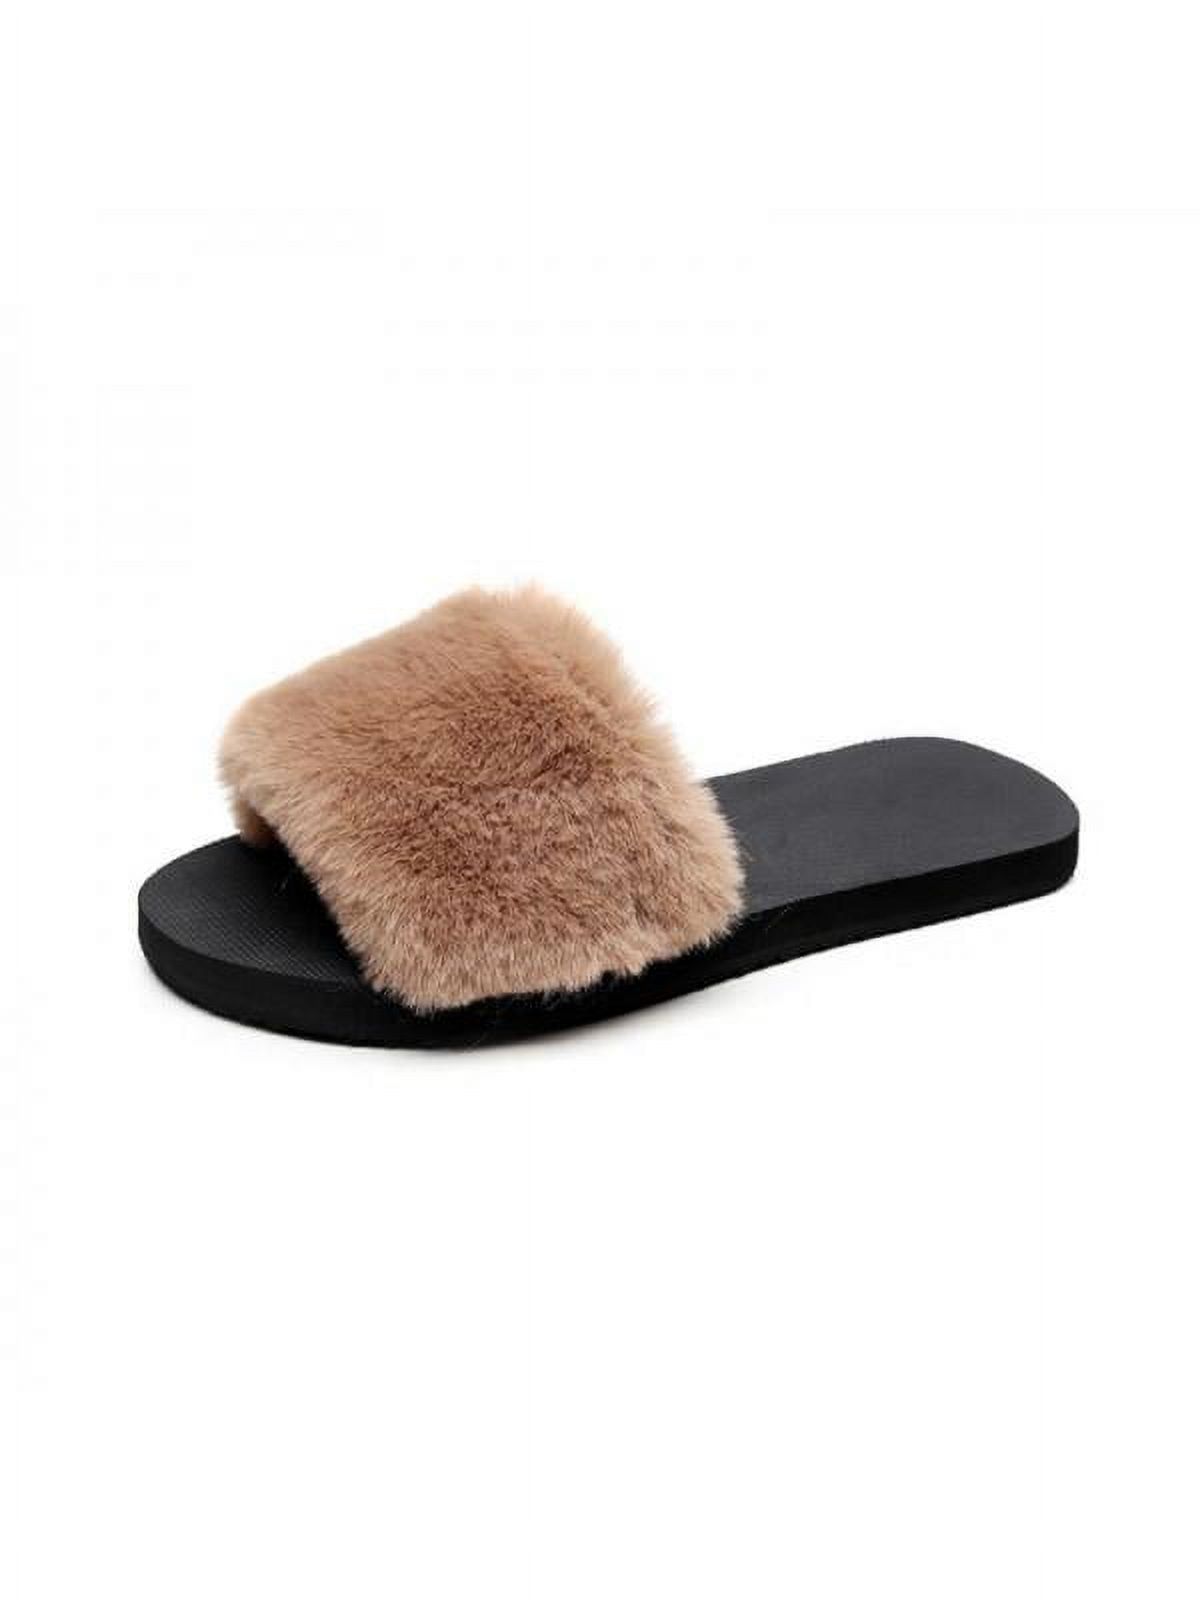 Ropalia Womens Winter Fur Solid Color Slippers Home Anti-Slip Warm Cotton Trailer Shoes Ladies Casual Shoes - image 1 of 3